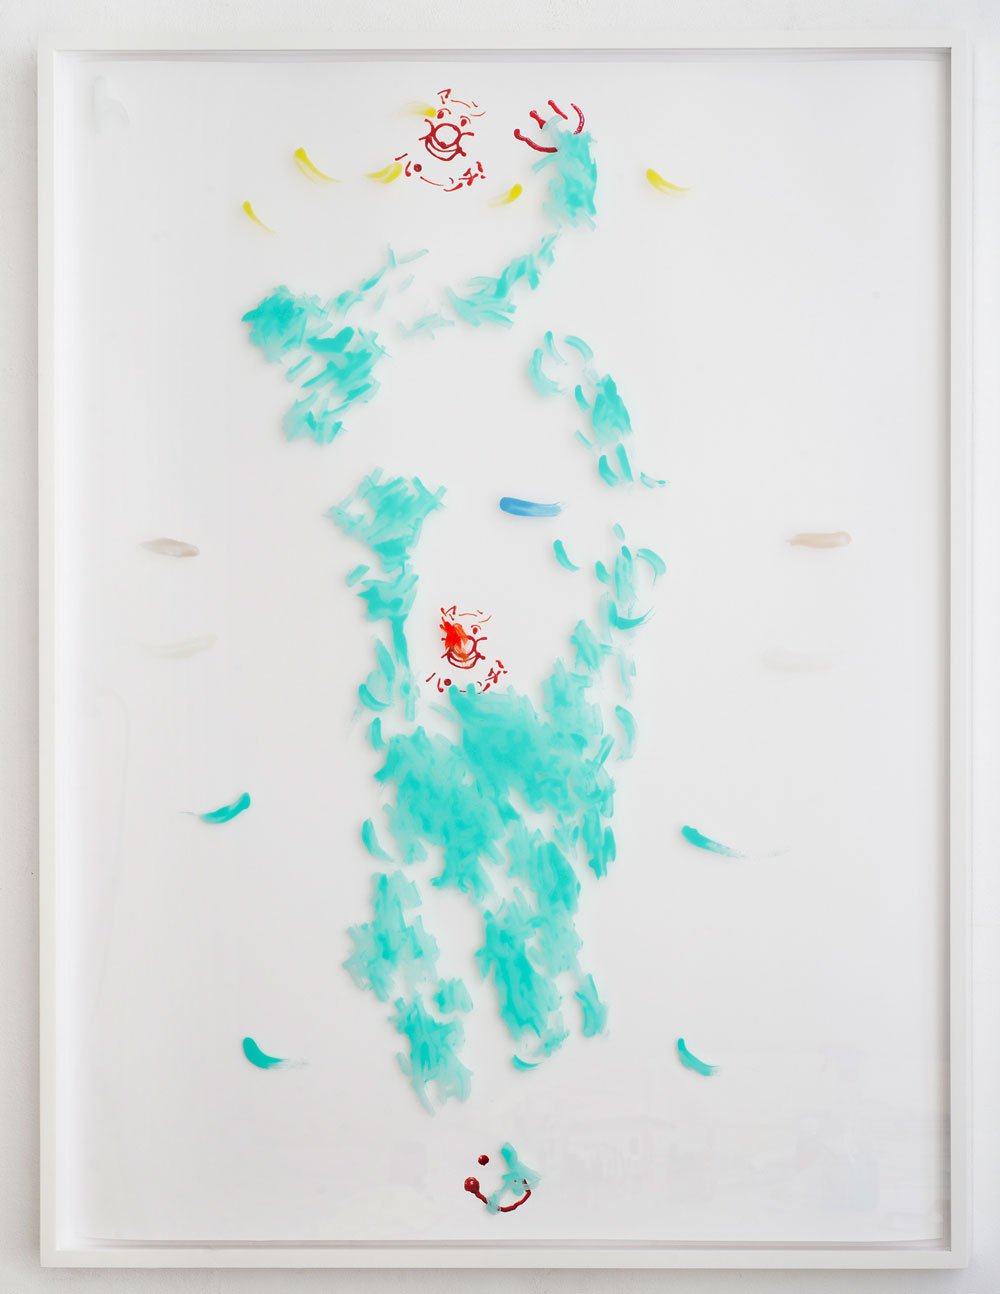 Lisa HolzerBut yes but yes, 2013Nailpolish on glass, pigment print on cotton paper88 x 68 cm